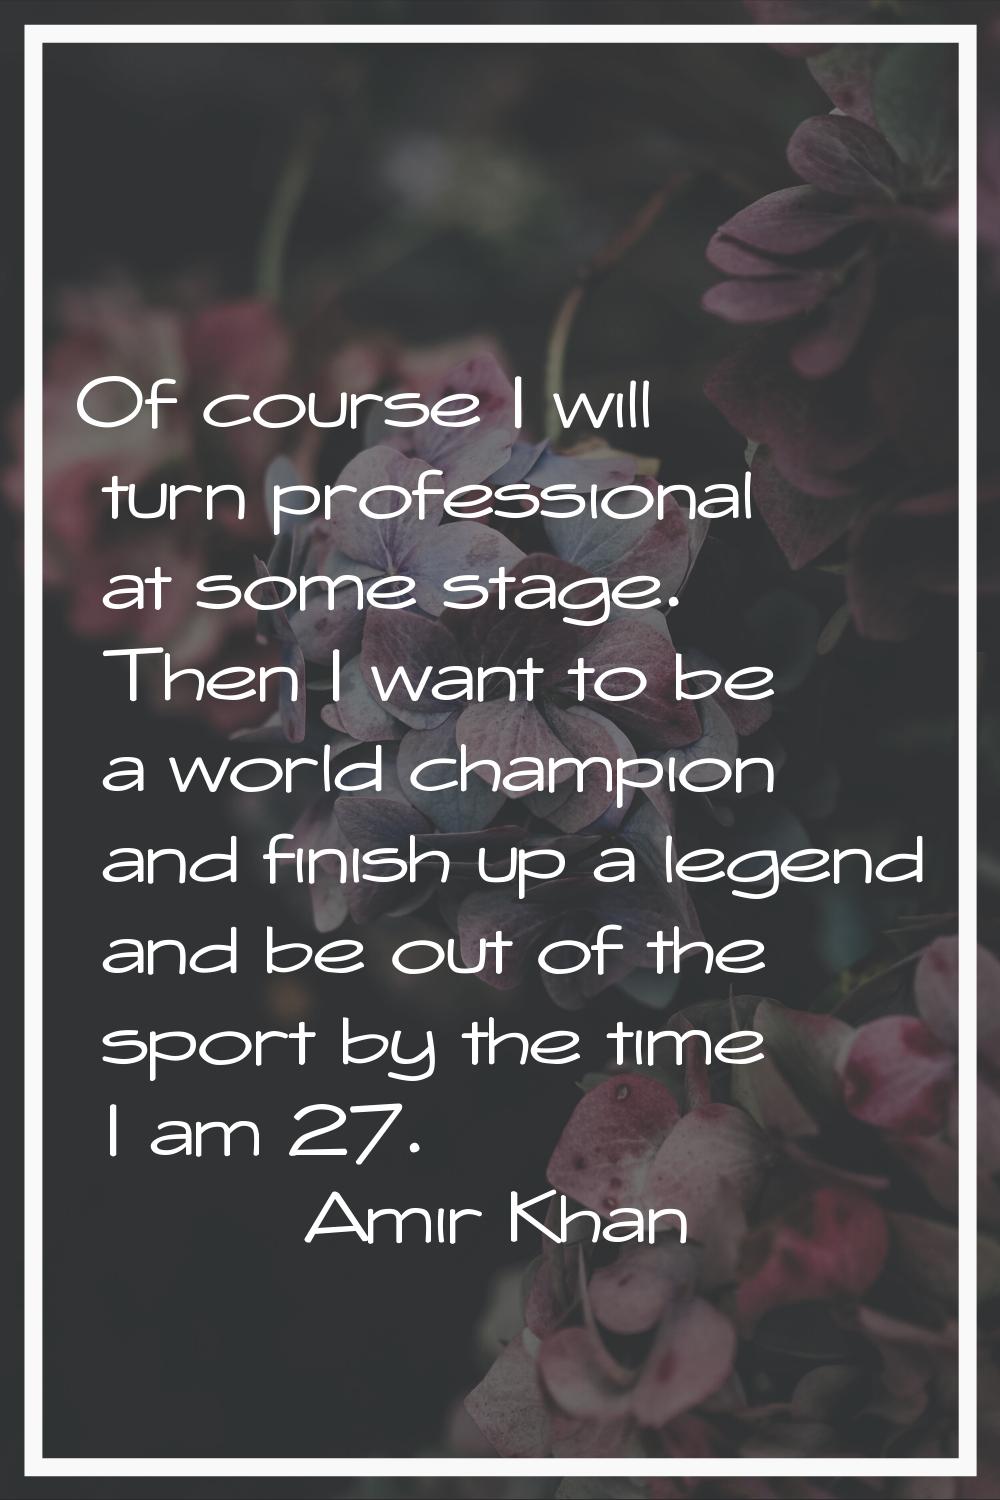 Of course I will turn professional at some stage. Then I want to be a world champion and finish up 